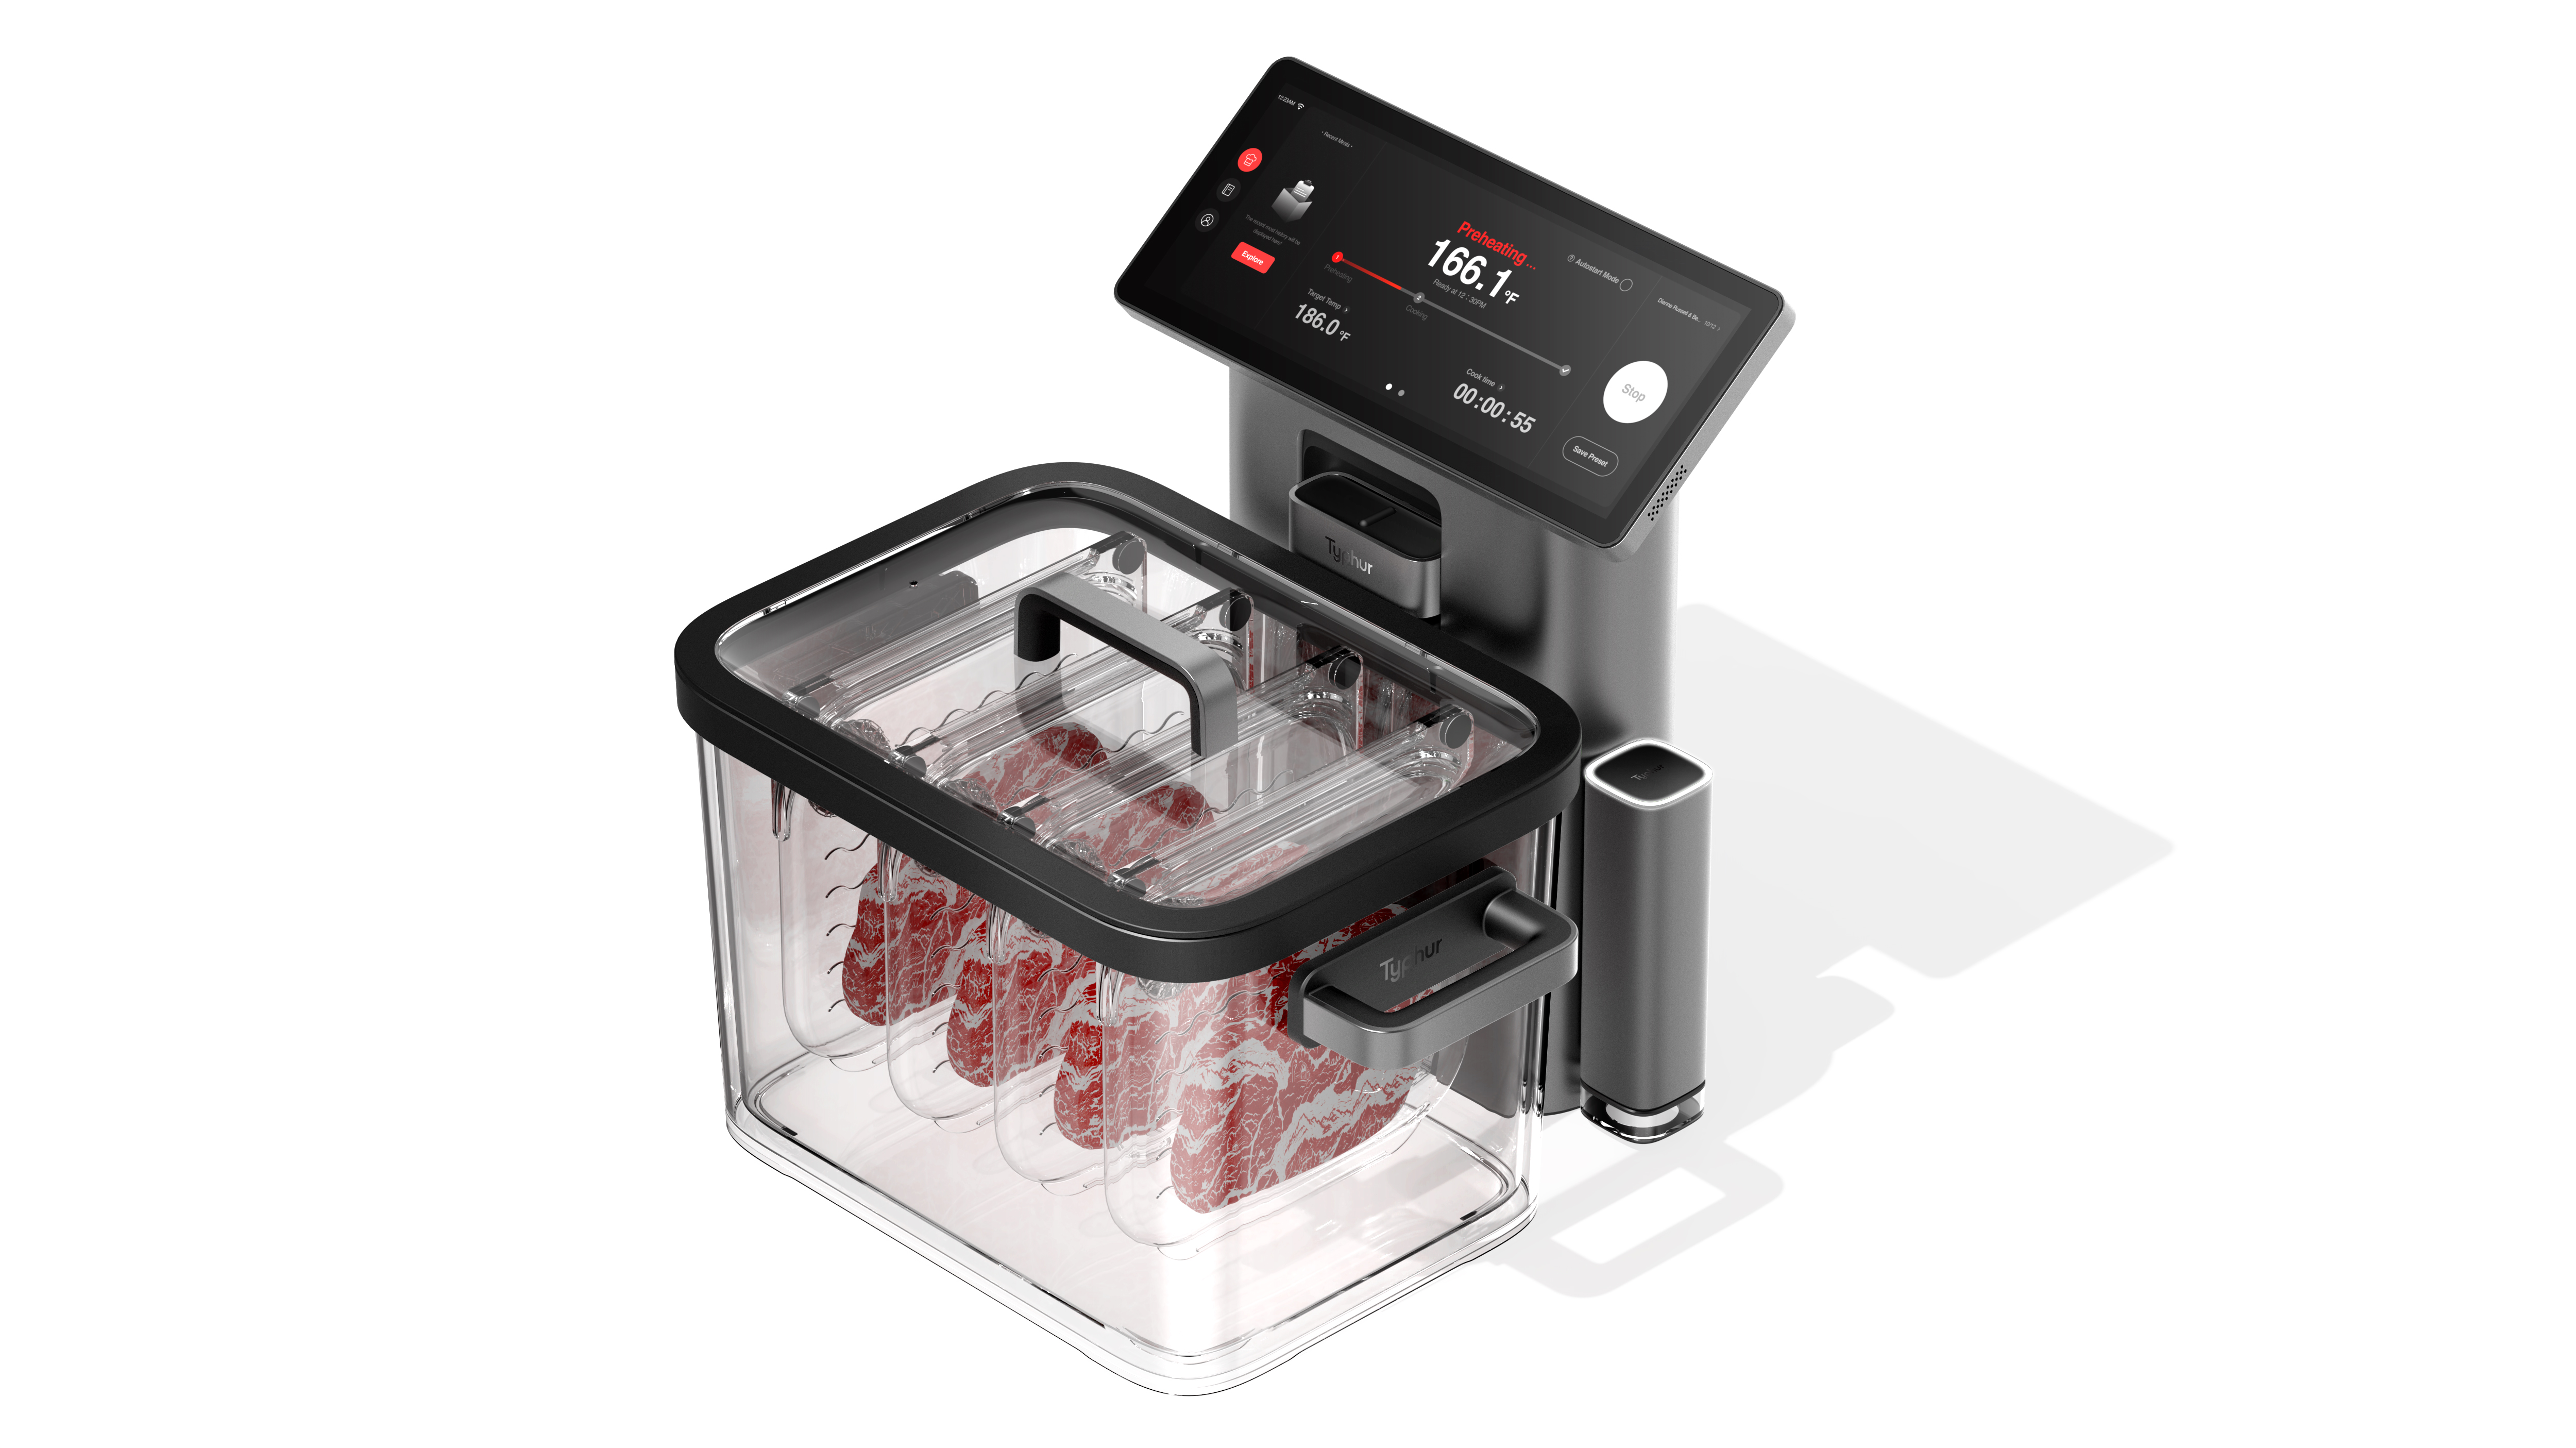 Typhur launches sous vide cooker with 12-inch display